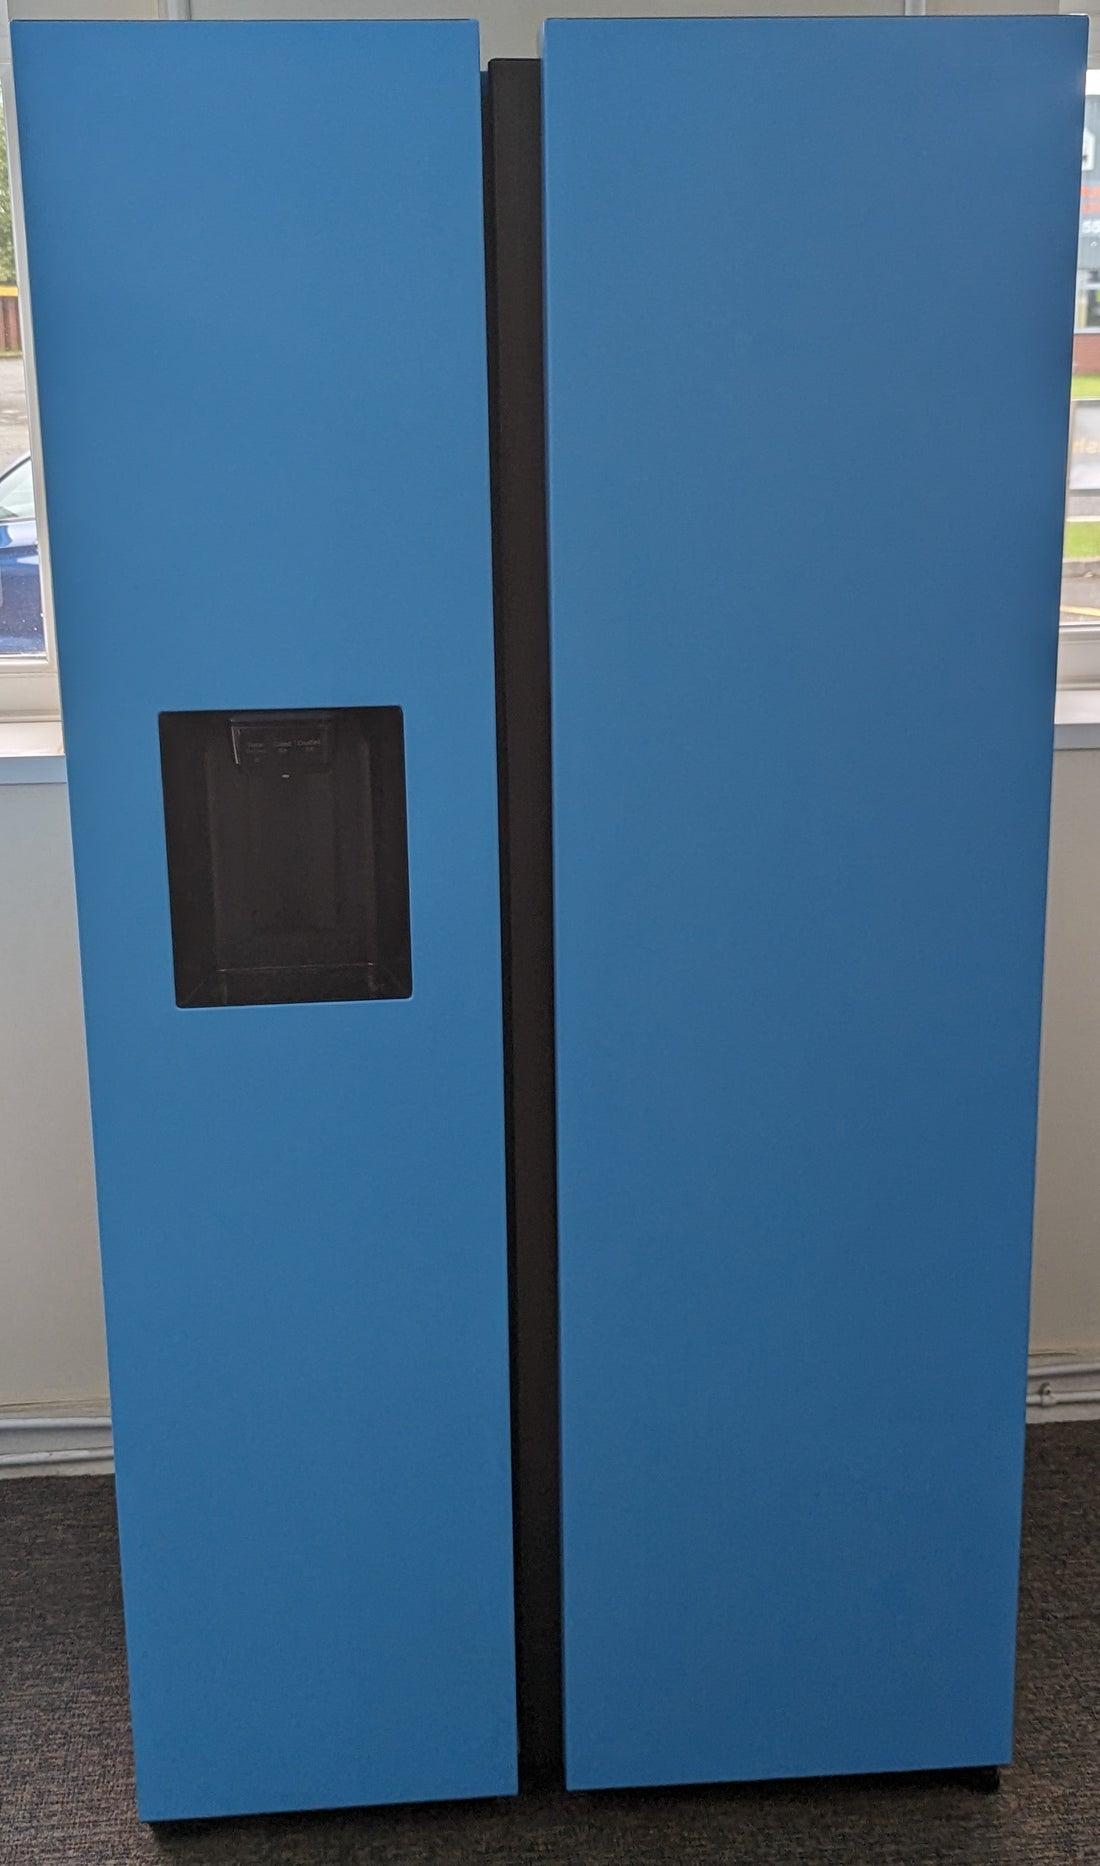 Samsung RS68A8820 Fridge Freezer American Plumbed Ice & Water in Bespoke Electric Blue